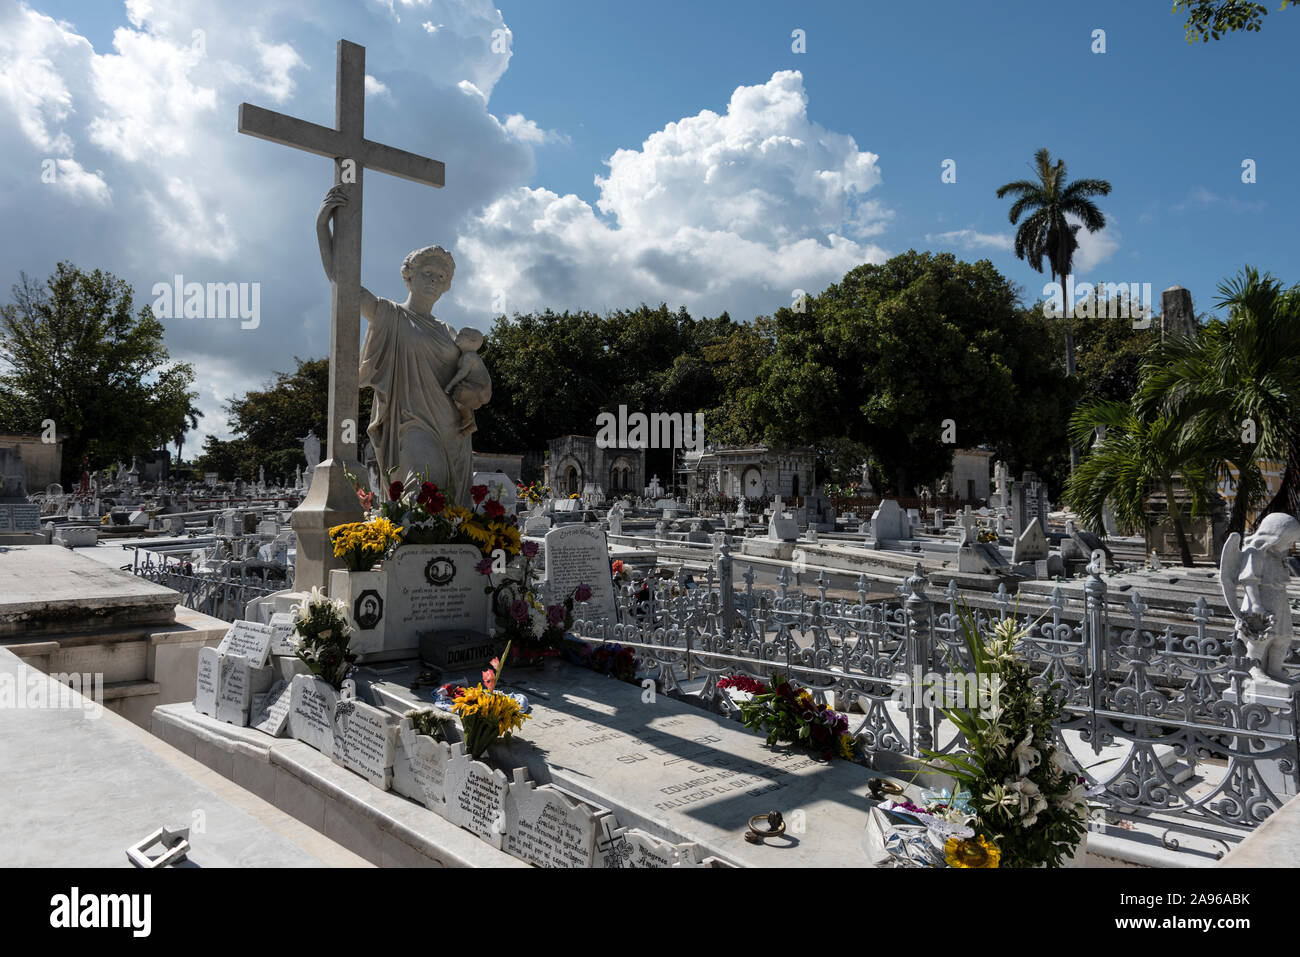 La Milagrosa (The Miraculous One) is   the grave of Amelia Goyri de la Hoz, who died during childbirth in 1901, along with her baby Both mother and b Stock Photo